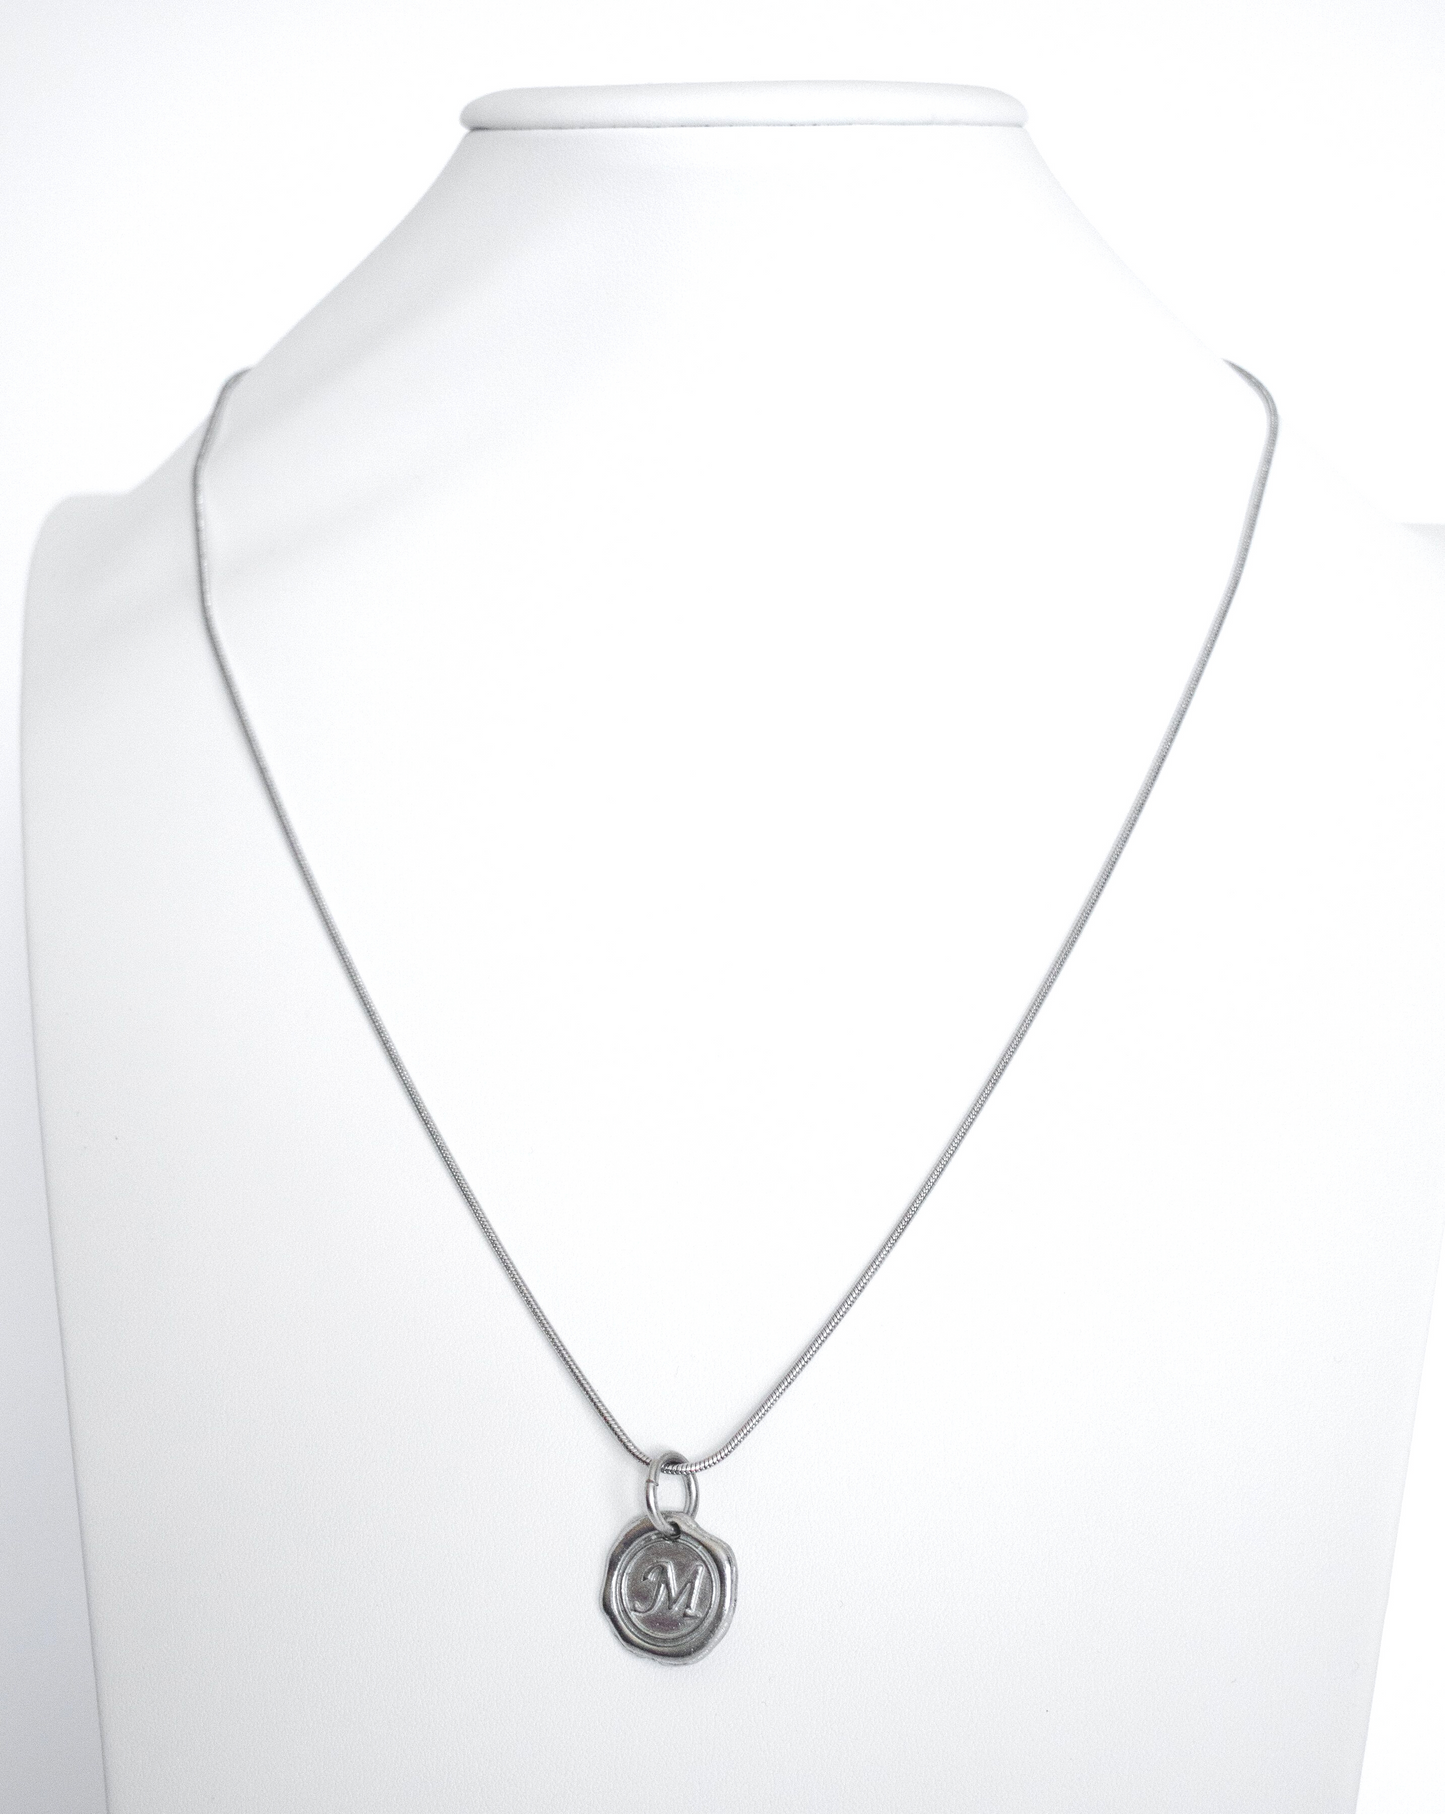 Handmade Pewter Wax Seal Monogram Initial Necklace- Jewelry - House of Morgan Pewter